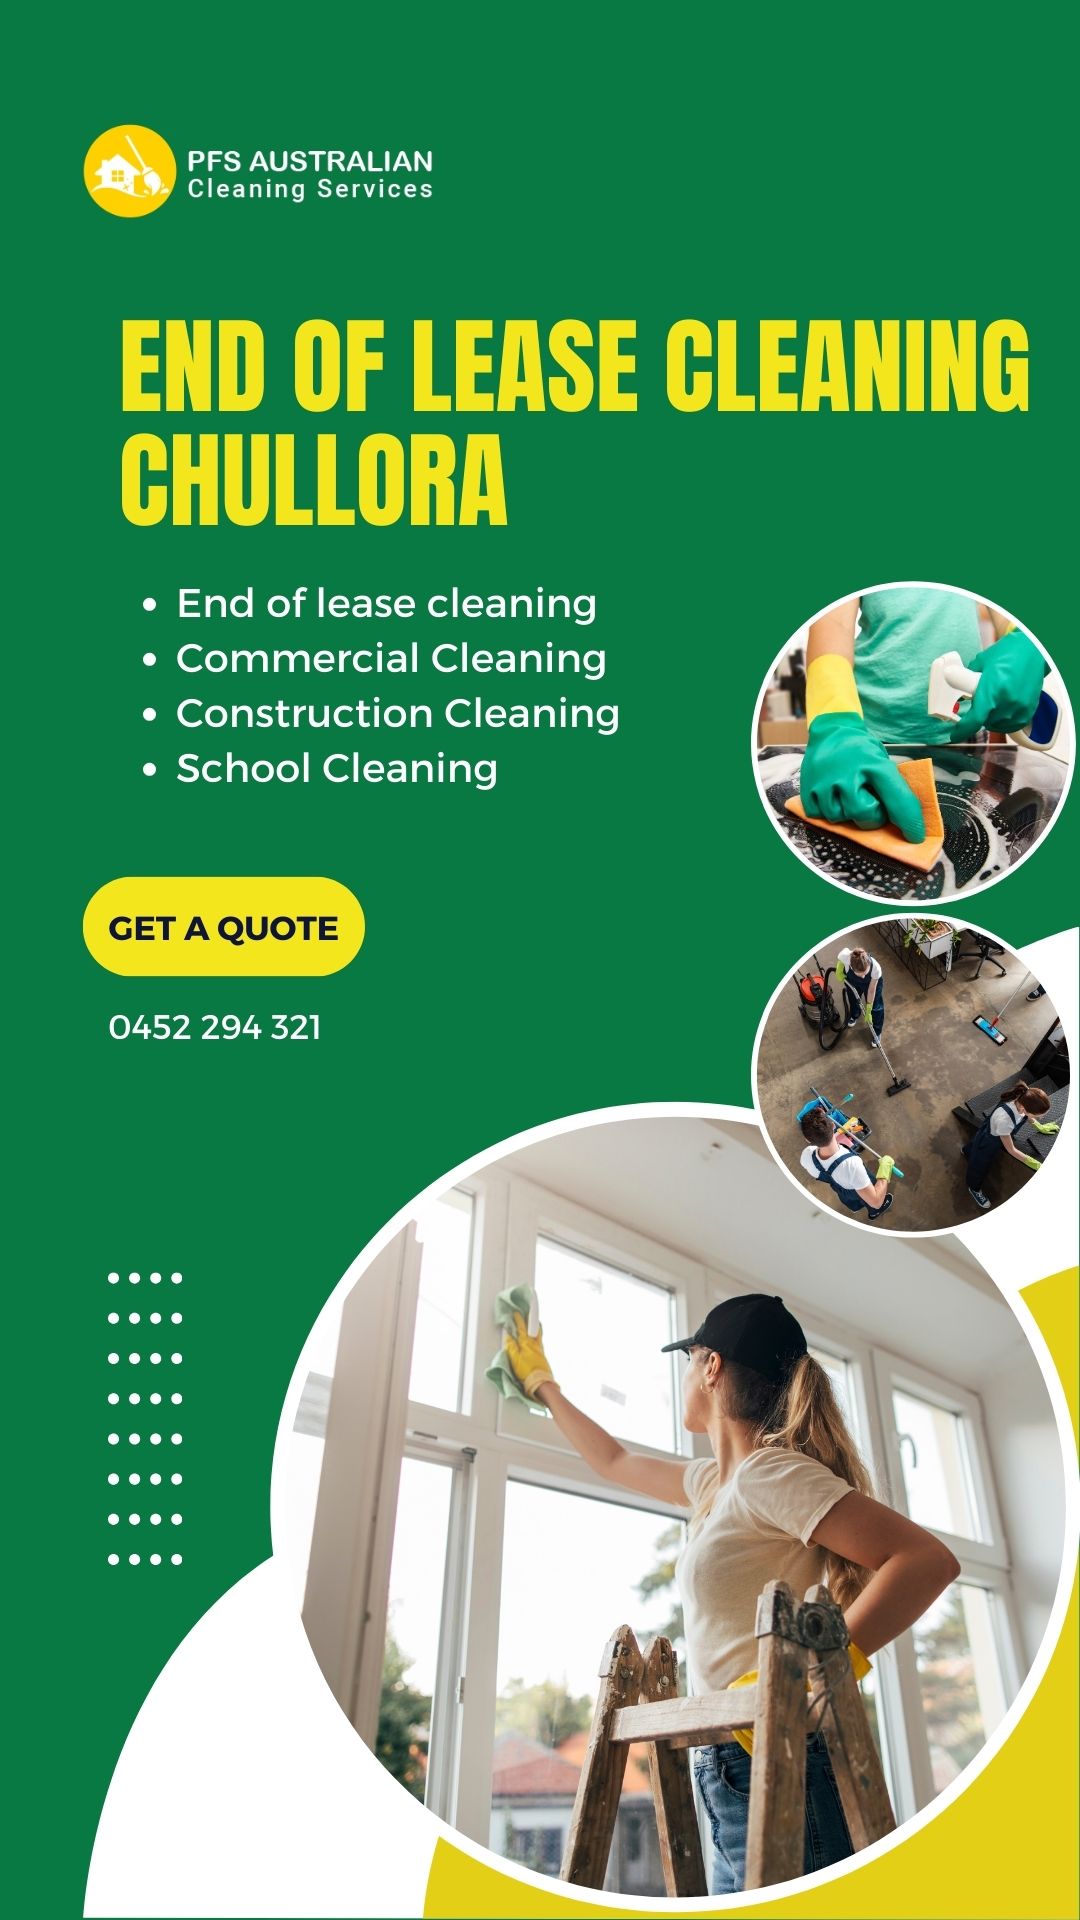 End of lease cleaning Chullora, sydney